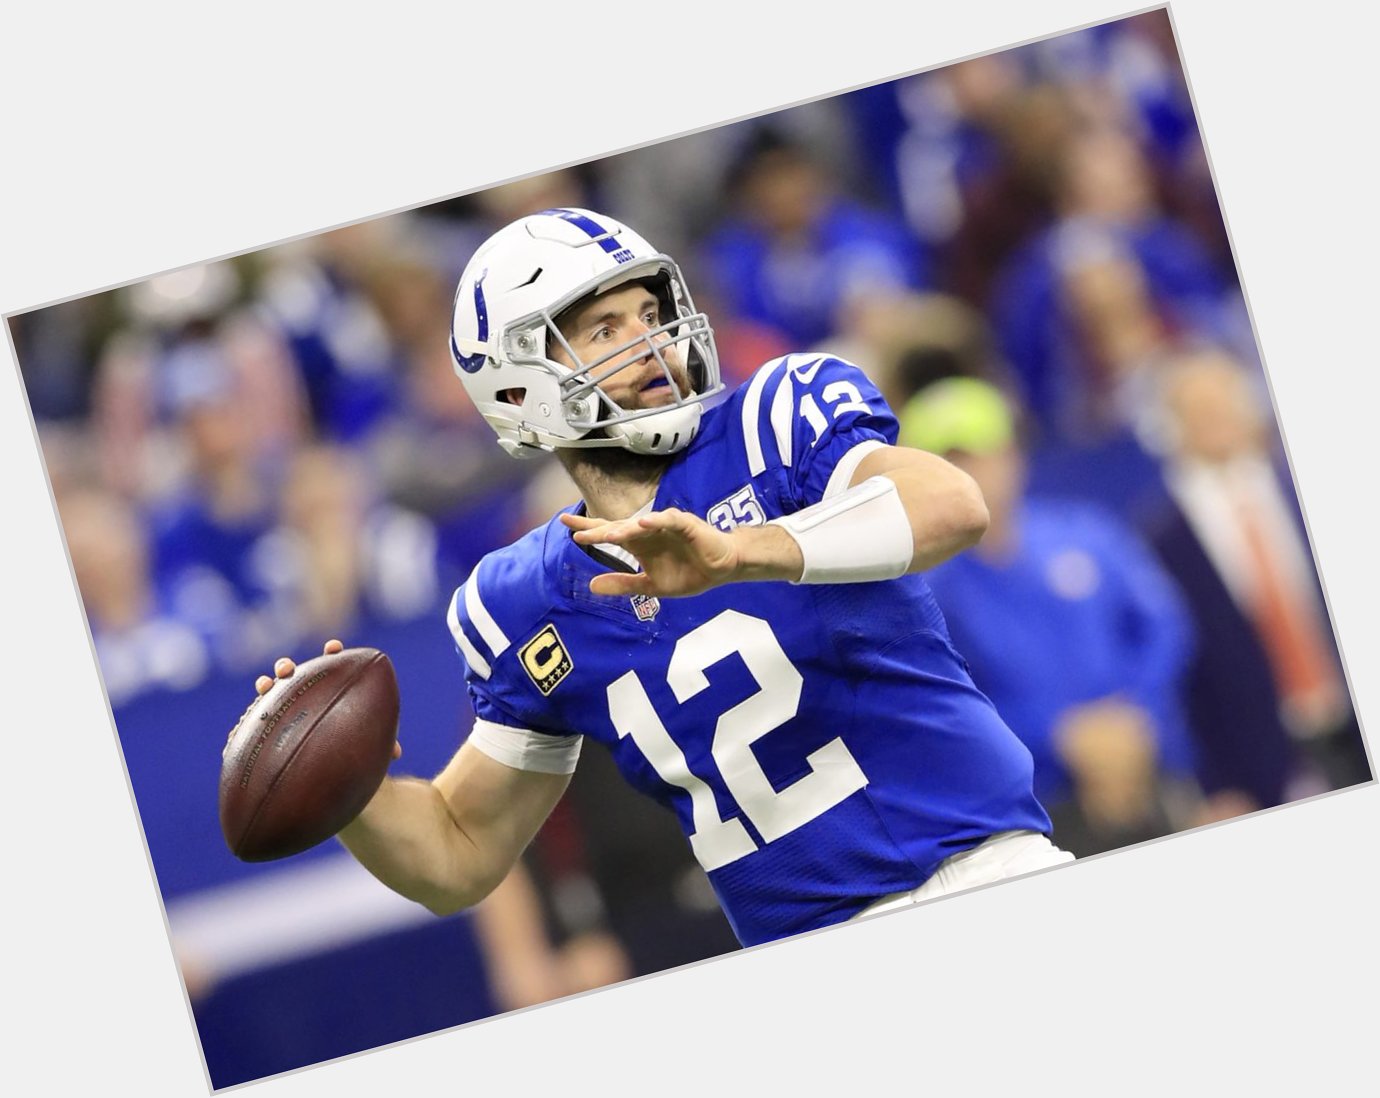 Former Andrew Luck Happy Birthday!
Record 53-33
Comp 60.8 %
Yards 23,671
171 TD 83 INT
4X Pro Bowl 